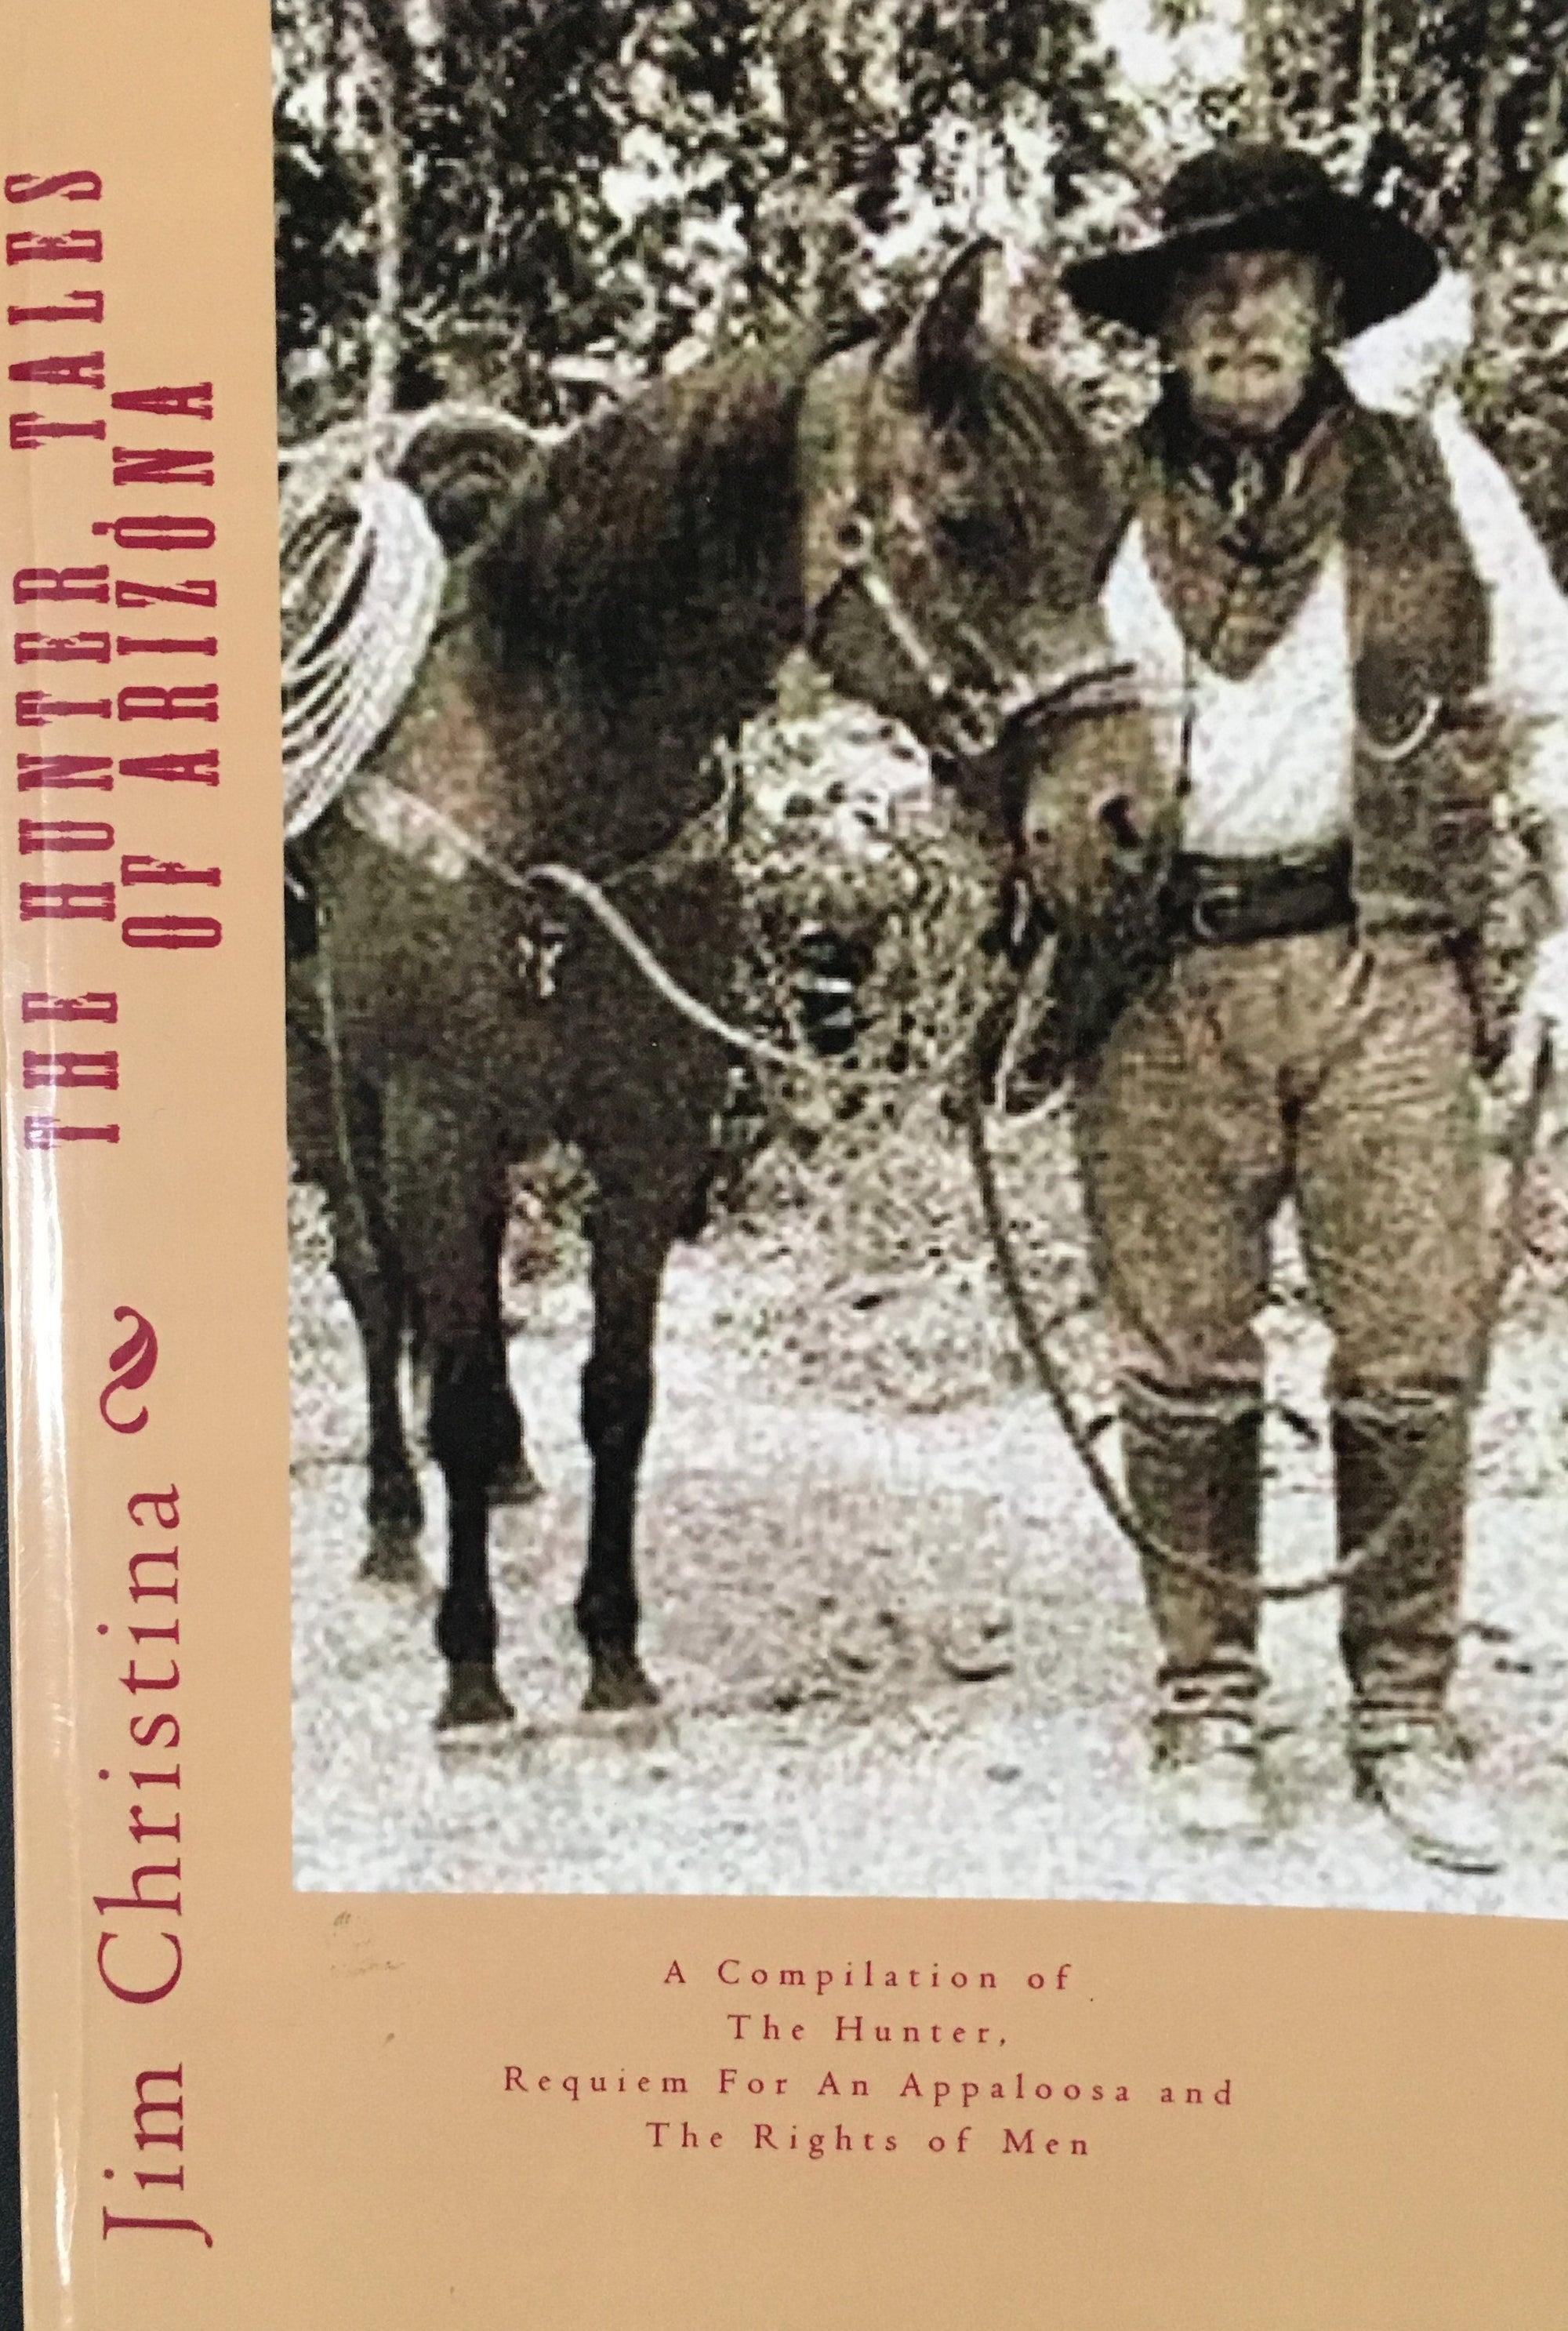 The Hunter Tales of Arizona by Jim Christina Book Cover